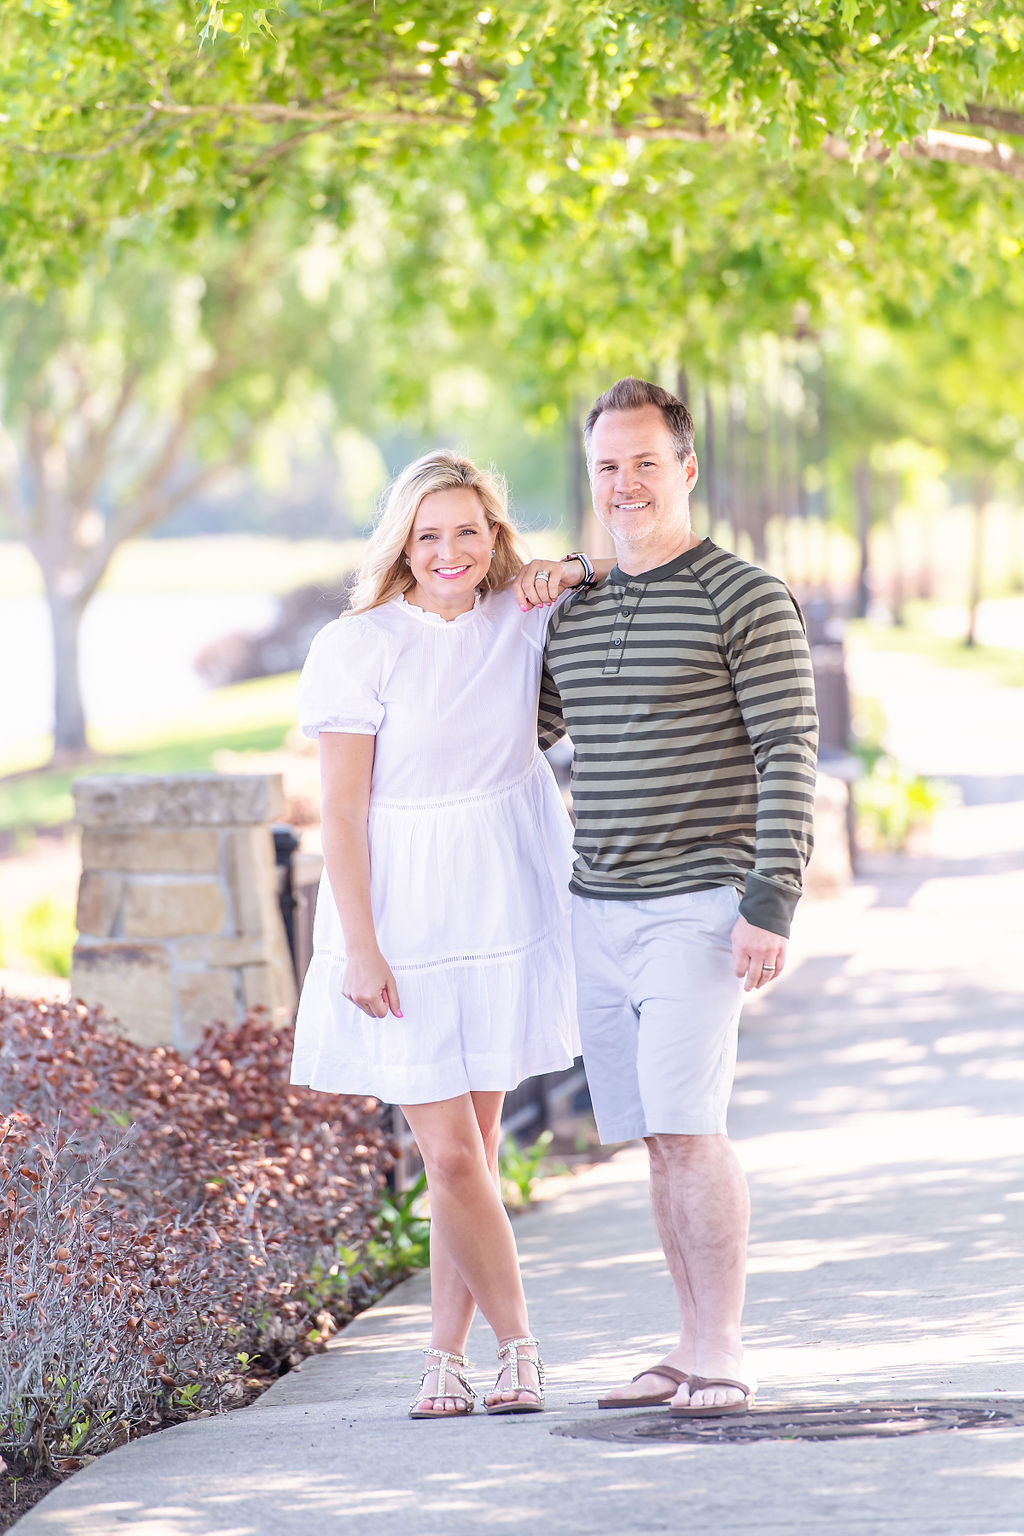 Walmart Summer Fashion by popular Houston fashion blog, The House of Fancy: image of a husband and wife standing together and wearing a white dress, green strip long sleeve shirt and tan shorts. 